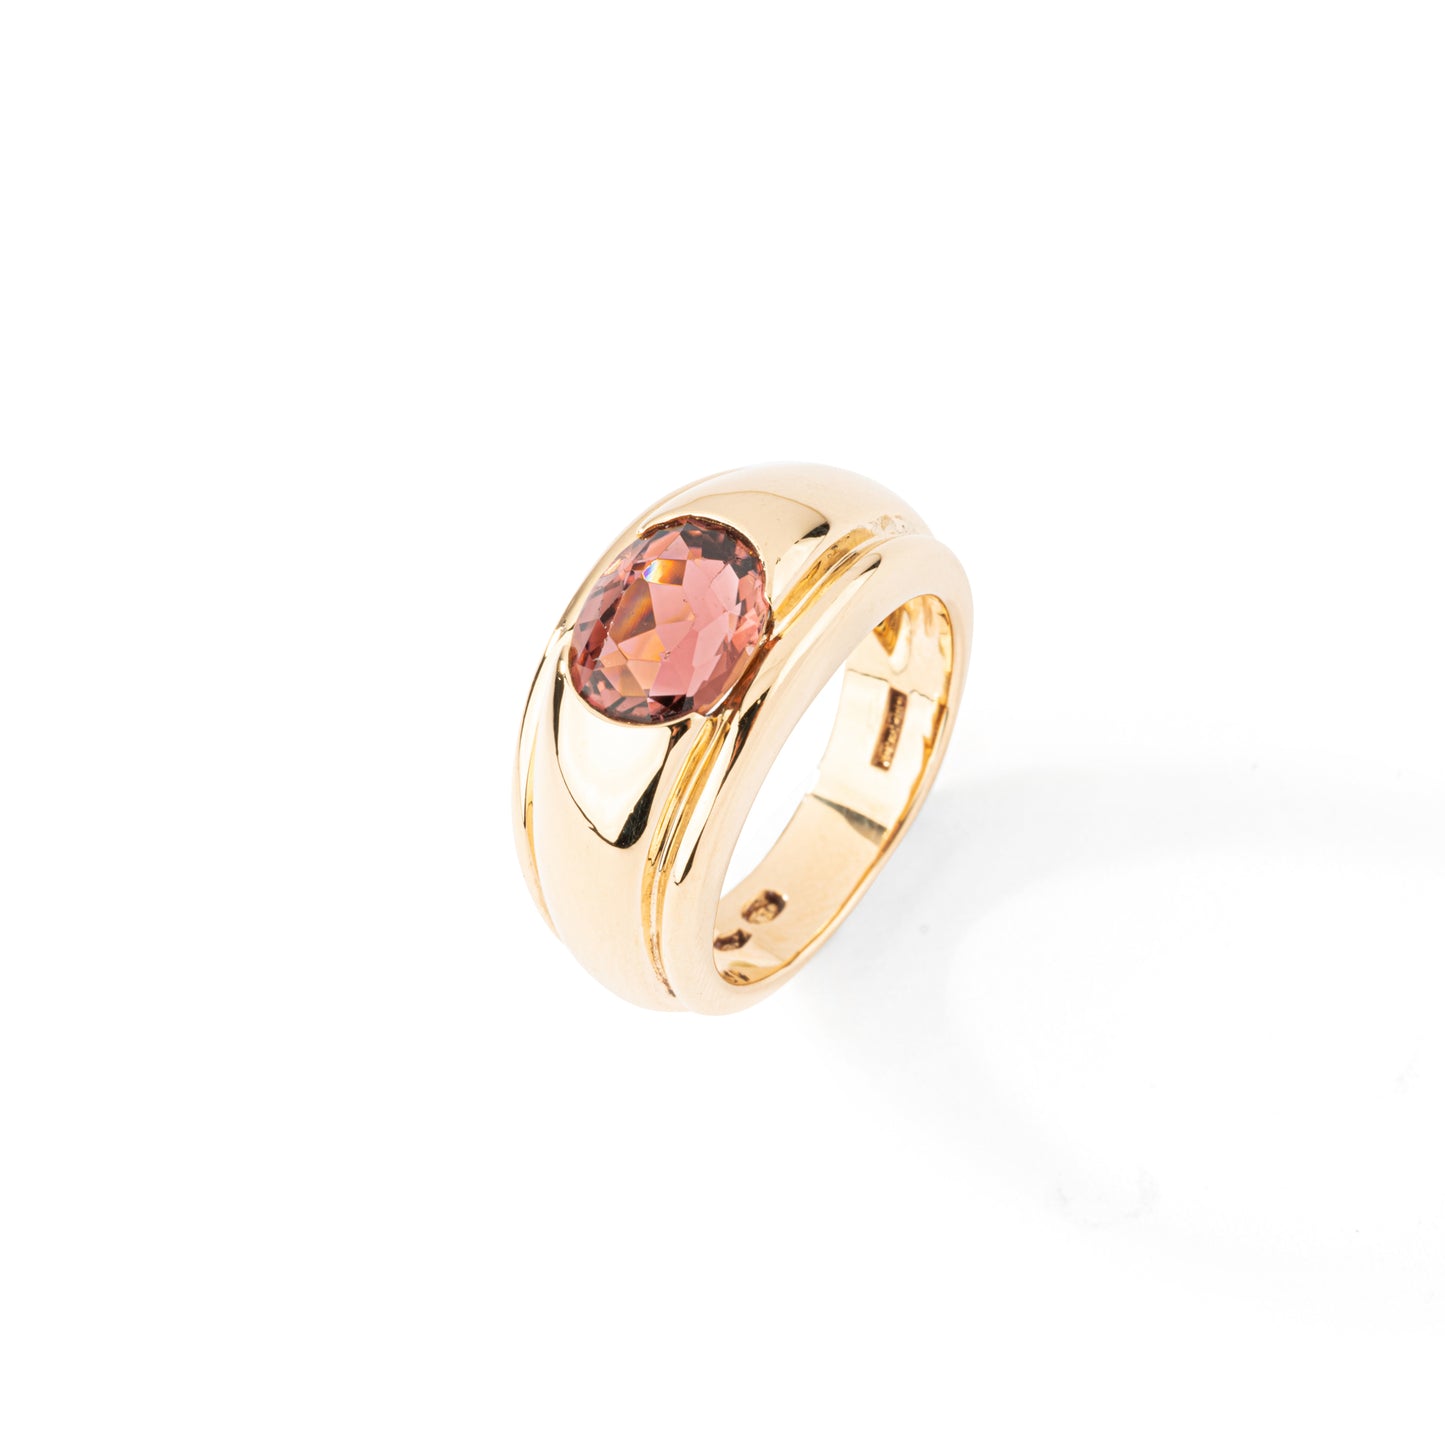 Vintage ring in yellow gold signed BOUCHERON.